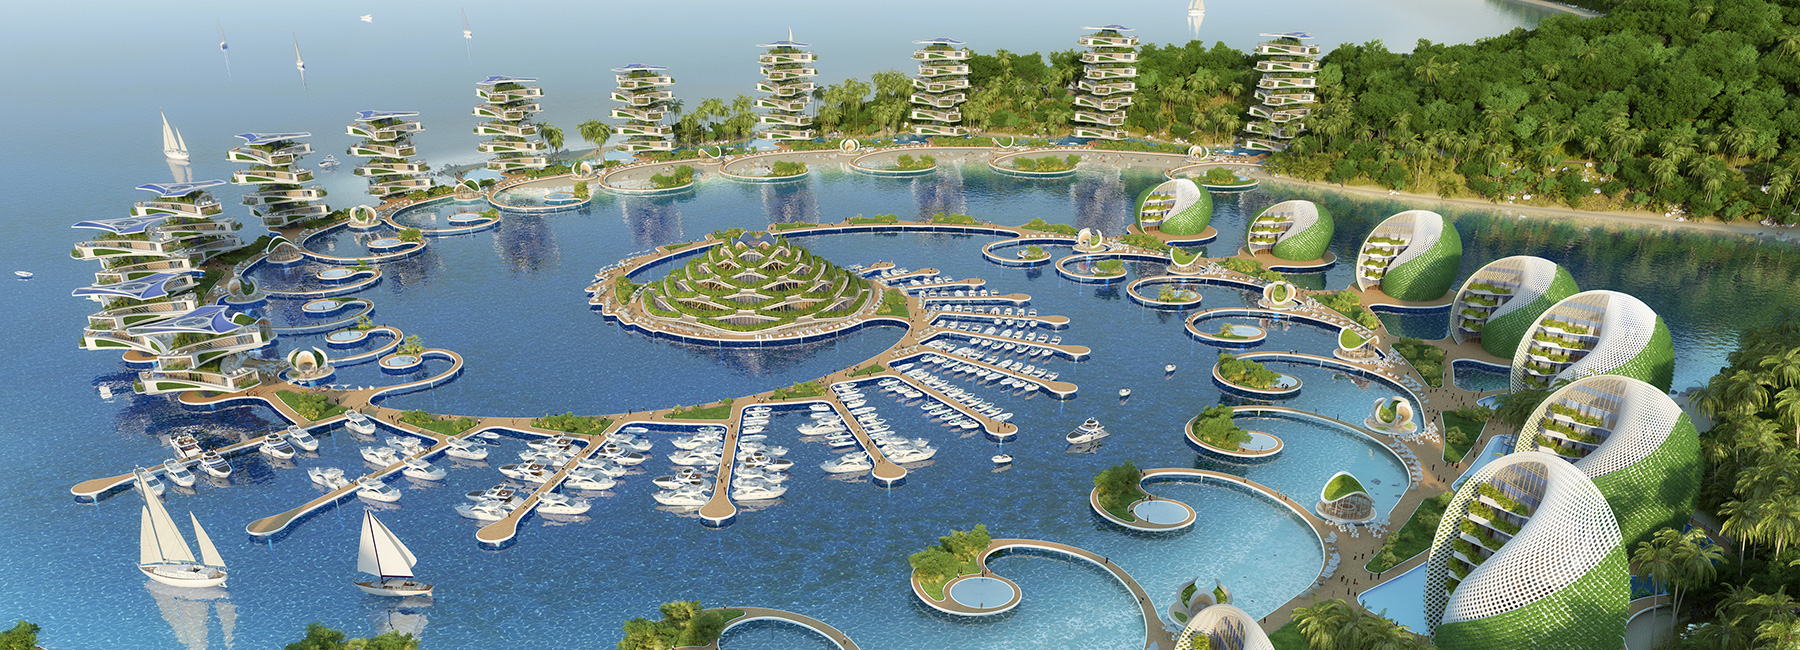 vincent callebaut proposes spiral-shaped eco-resort for the philippines